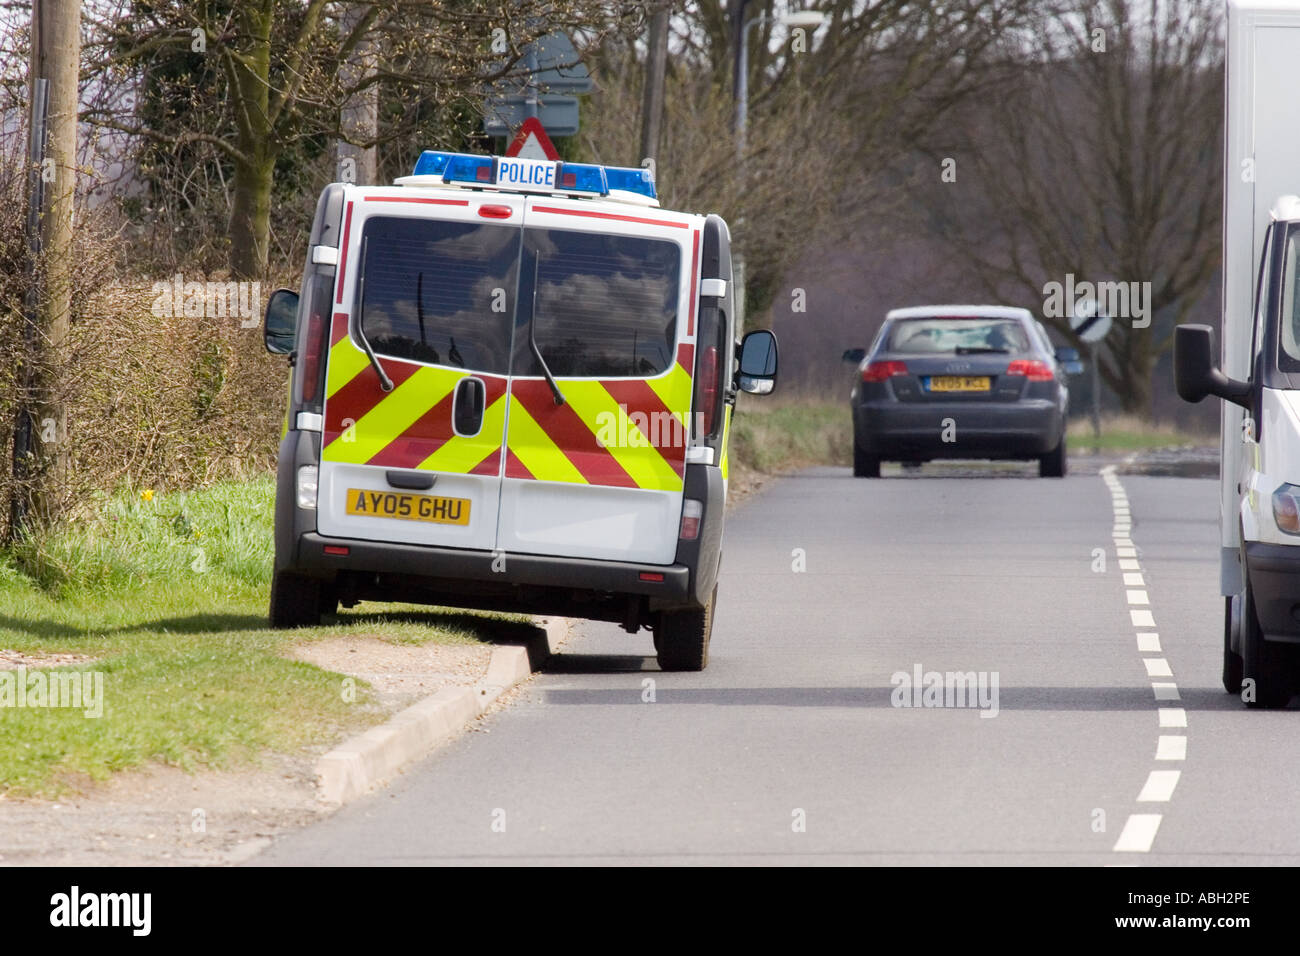 A police operated camera van in UK Stock Photo